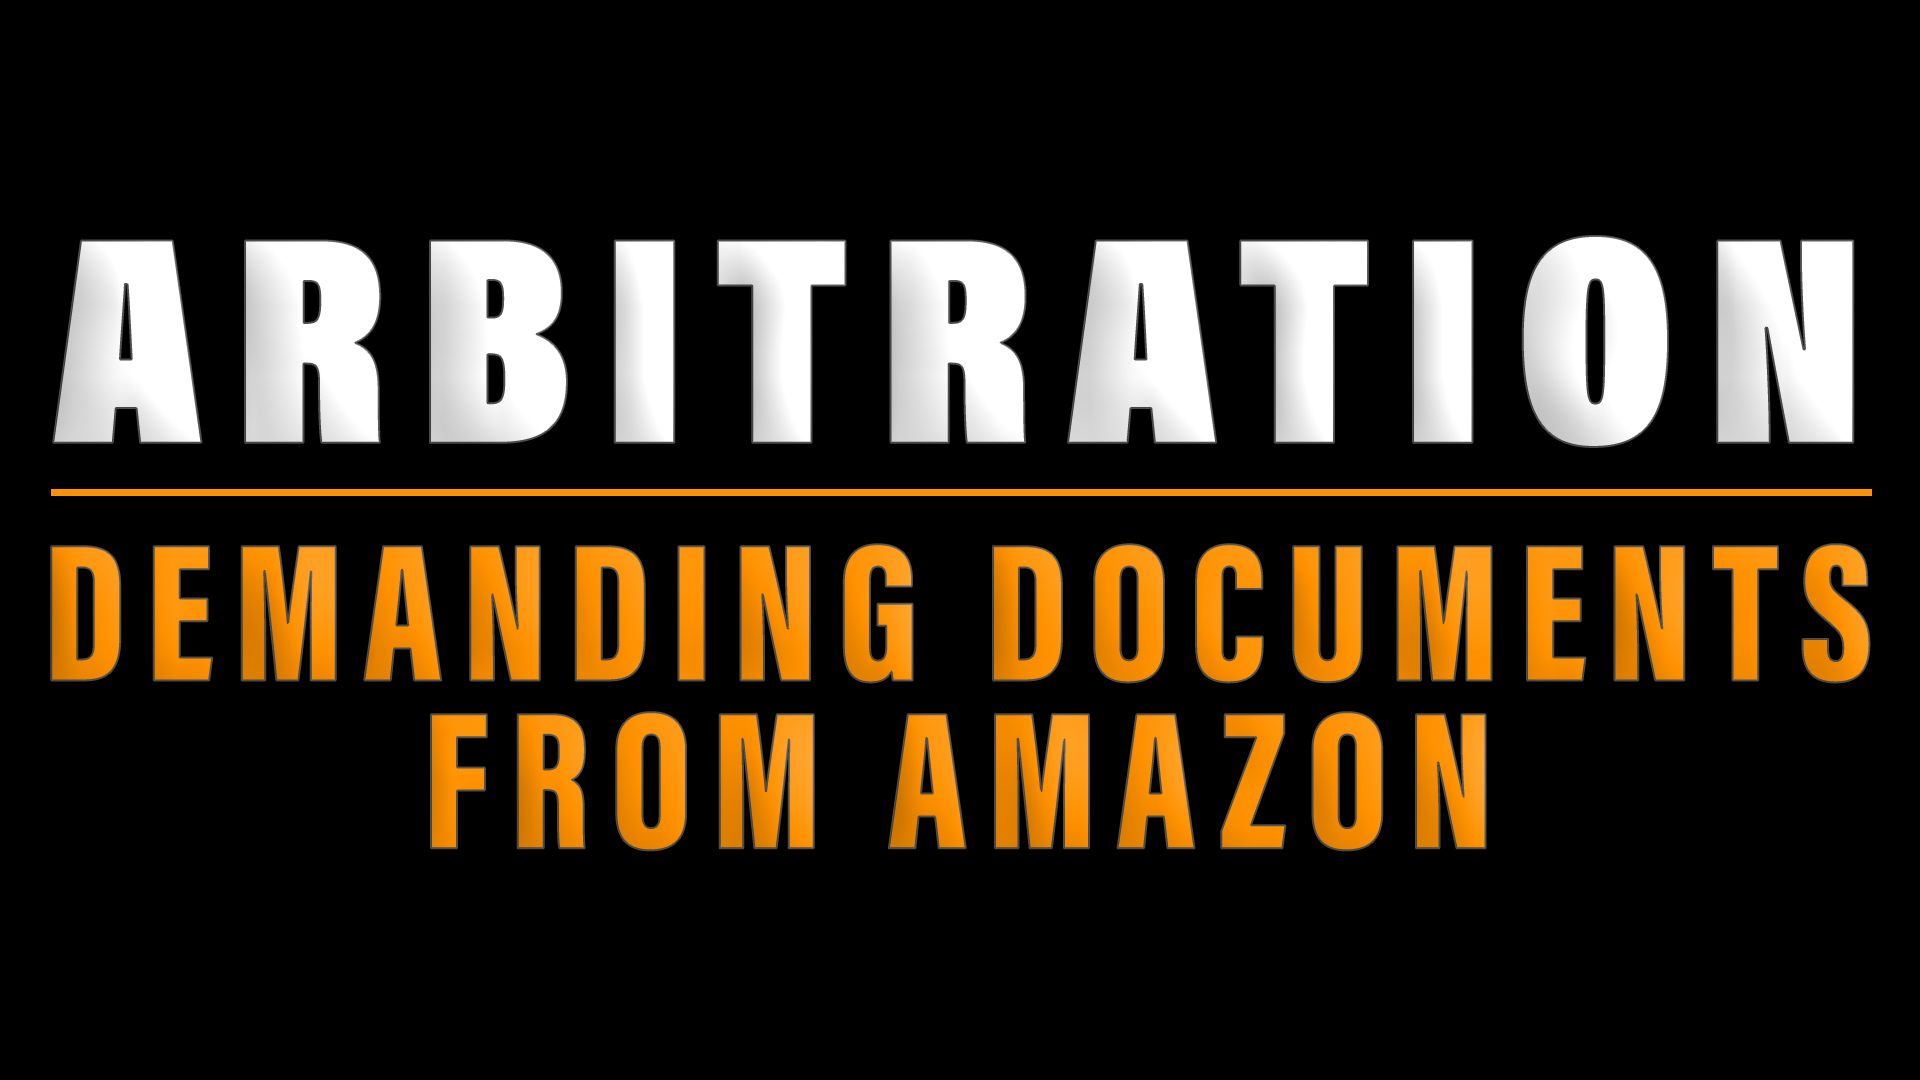 Arbitration and demanding documents from Amazon